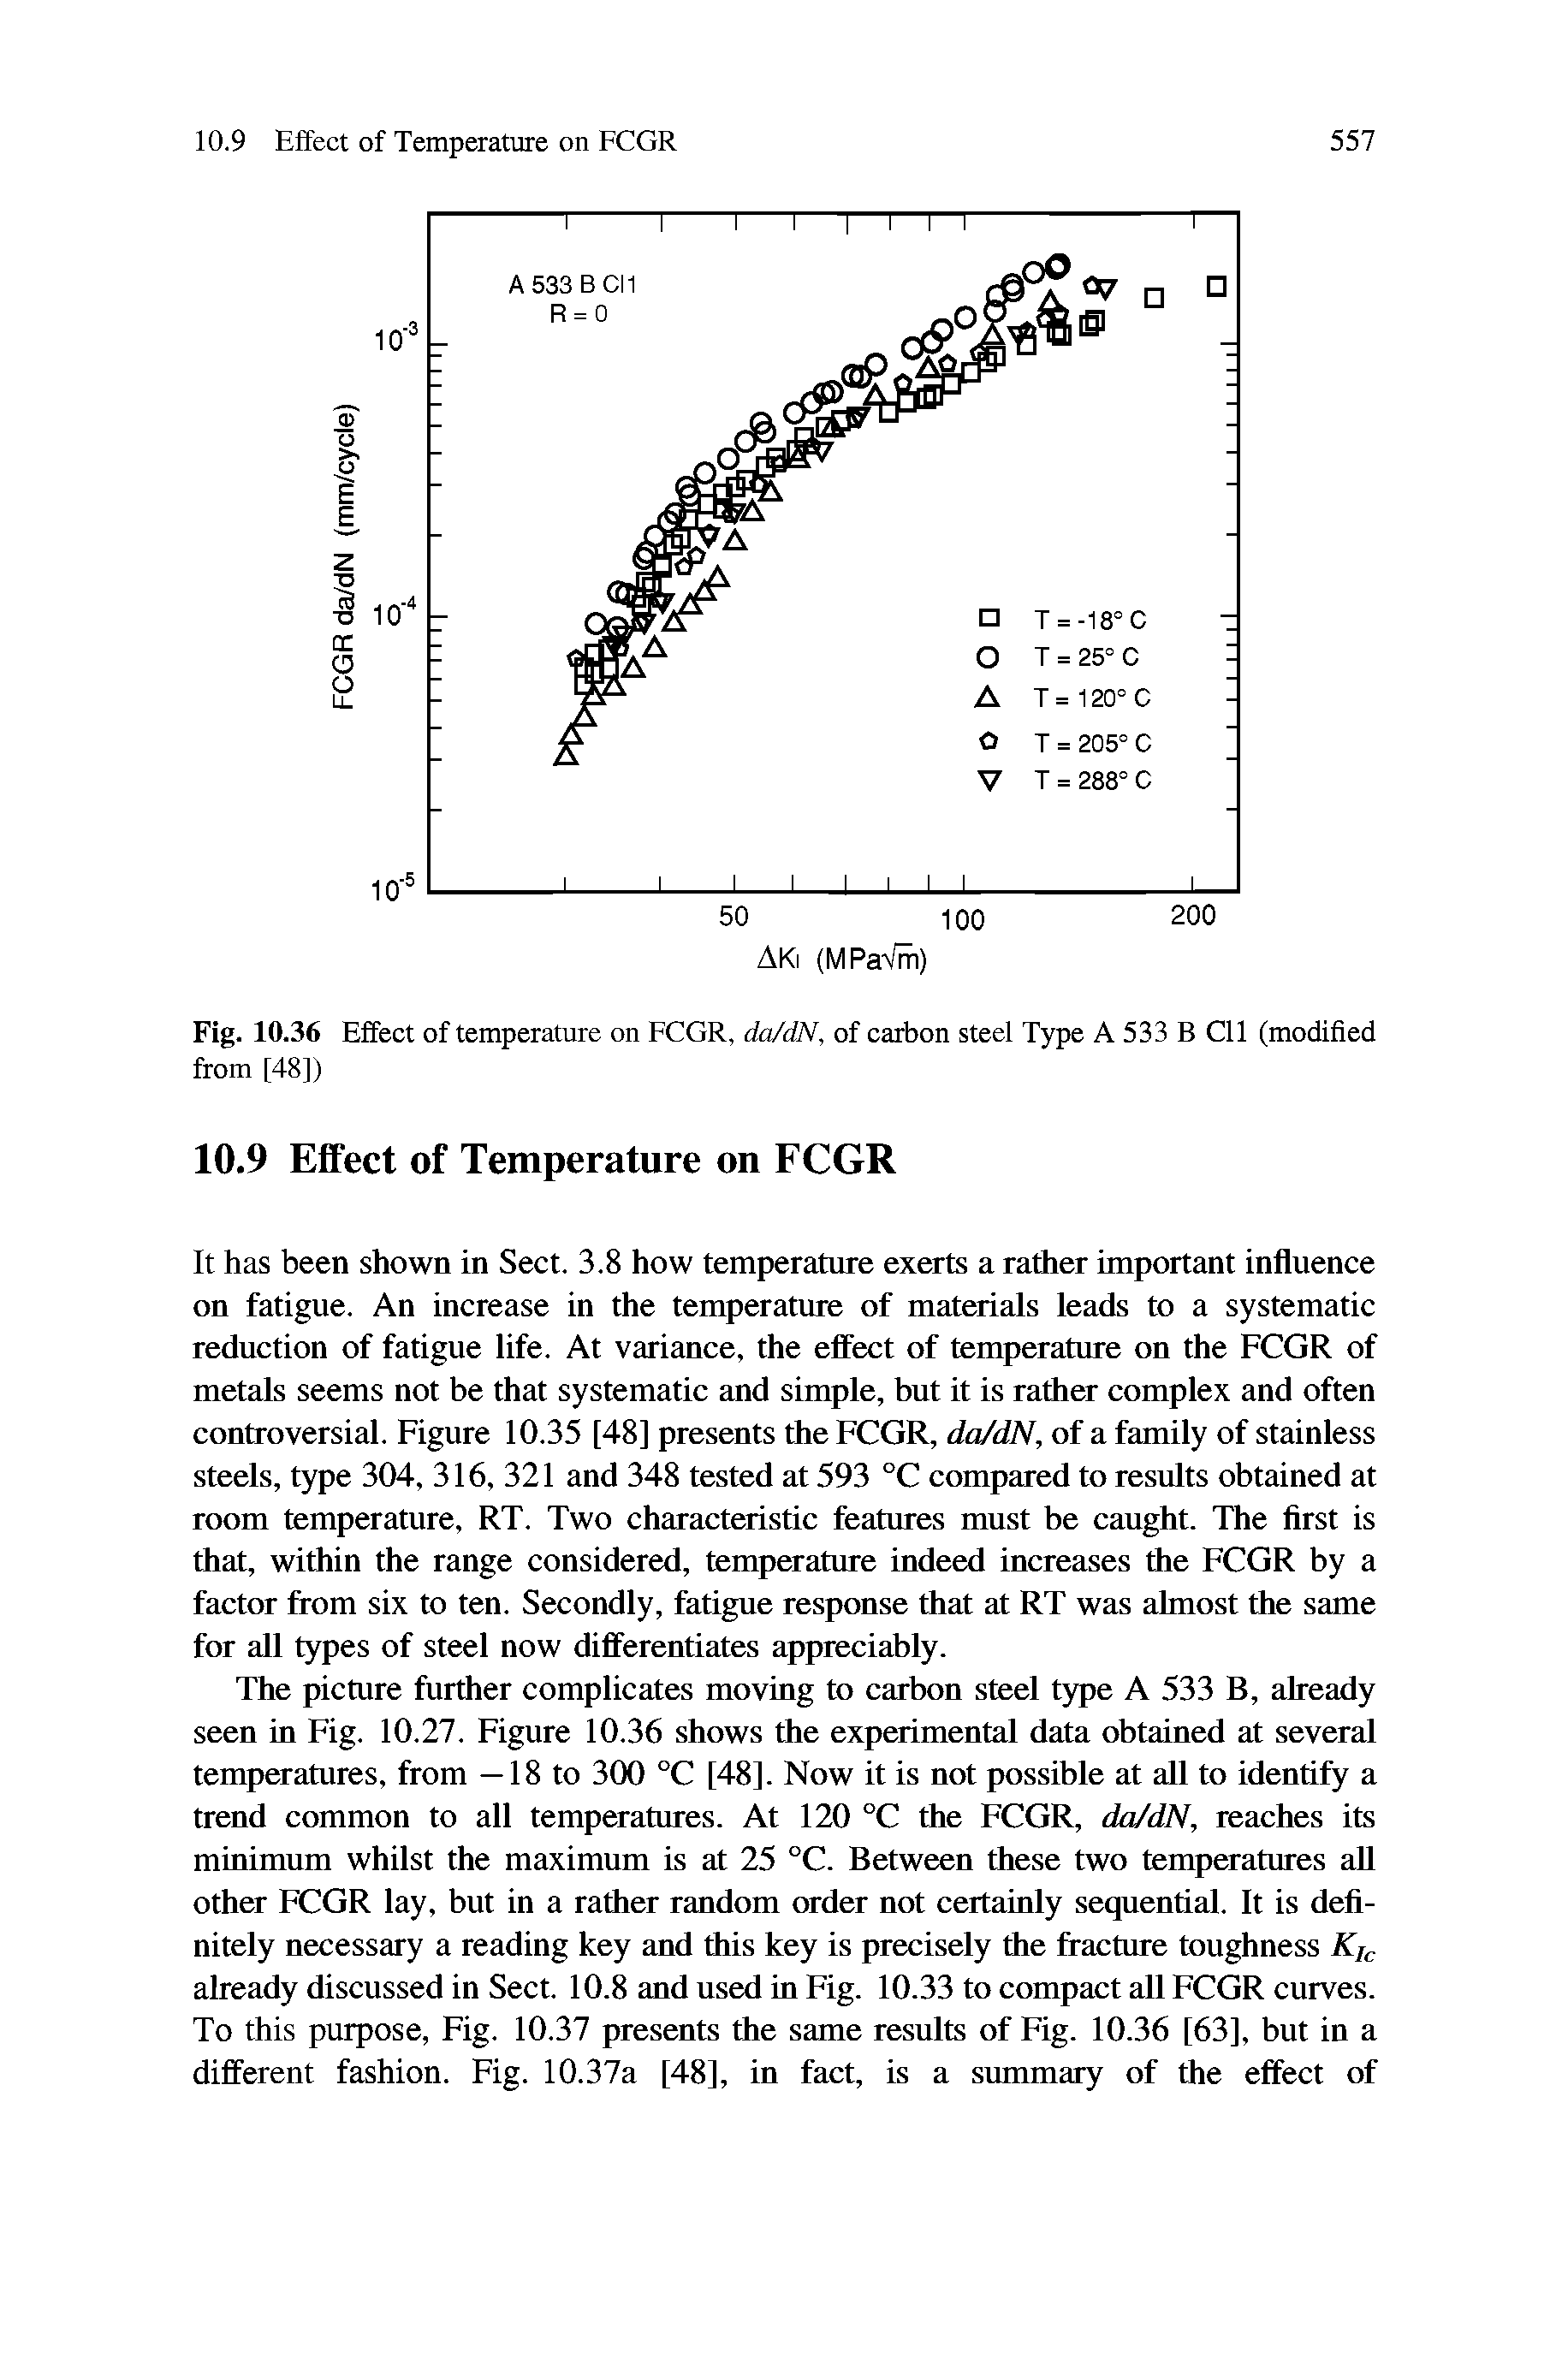 Fig. 10.36 Effect of temperature on FCGR, da/dN, of carbon steel Type A 533 B Cll (modified from [48])...